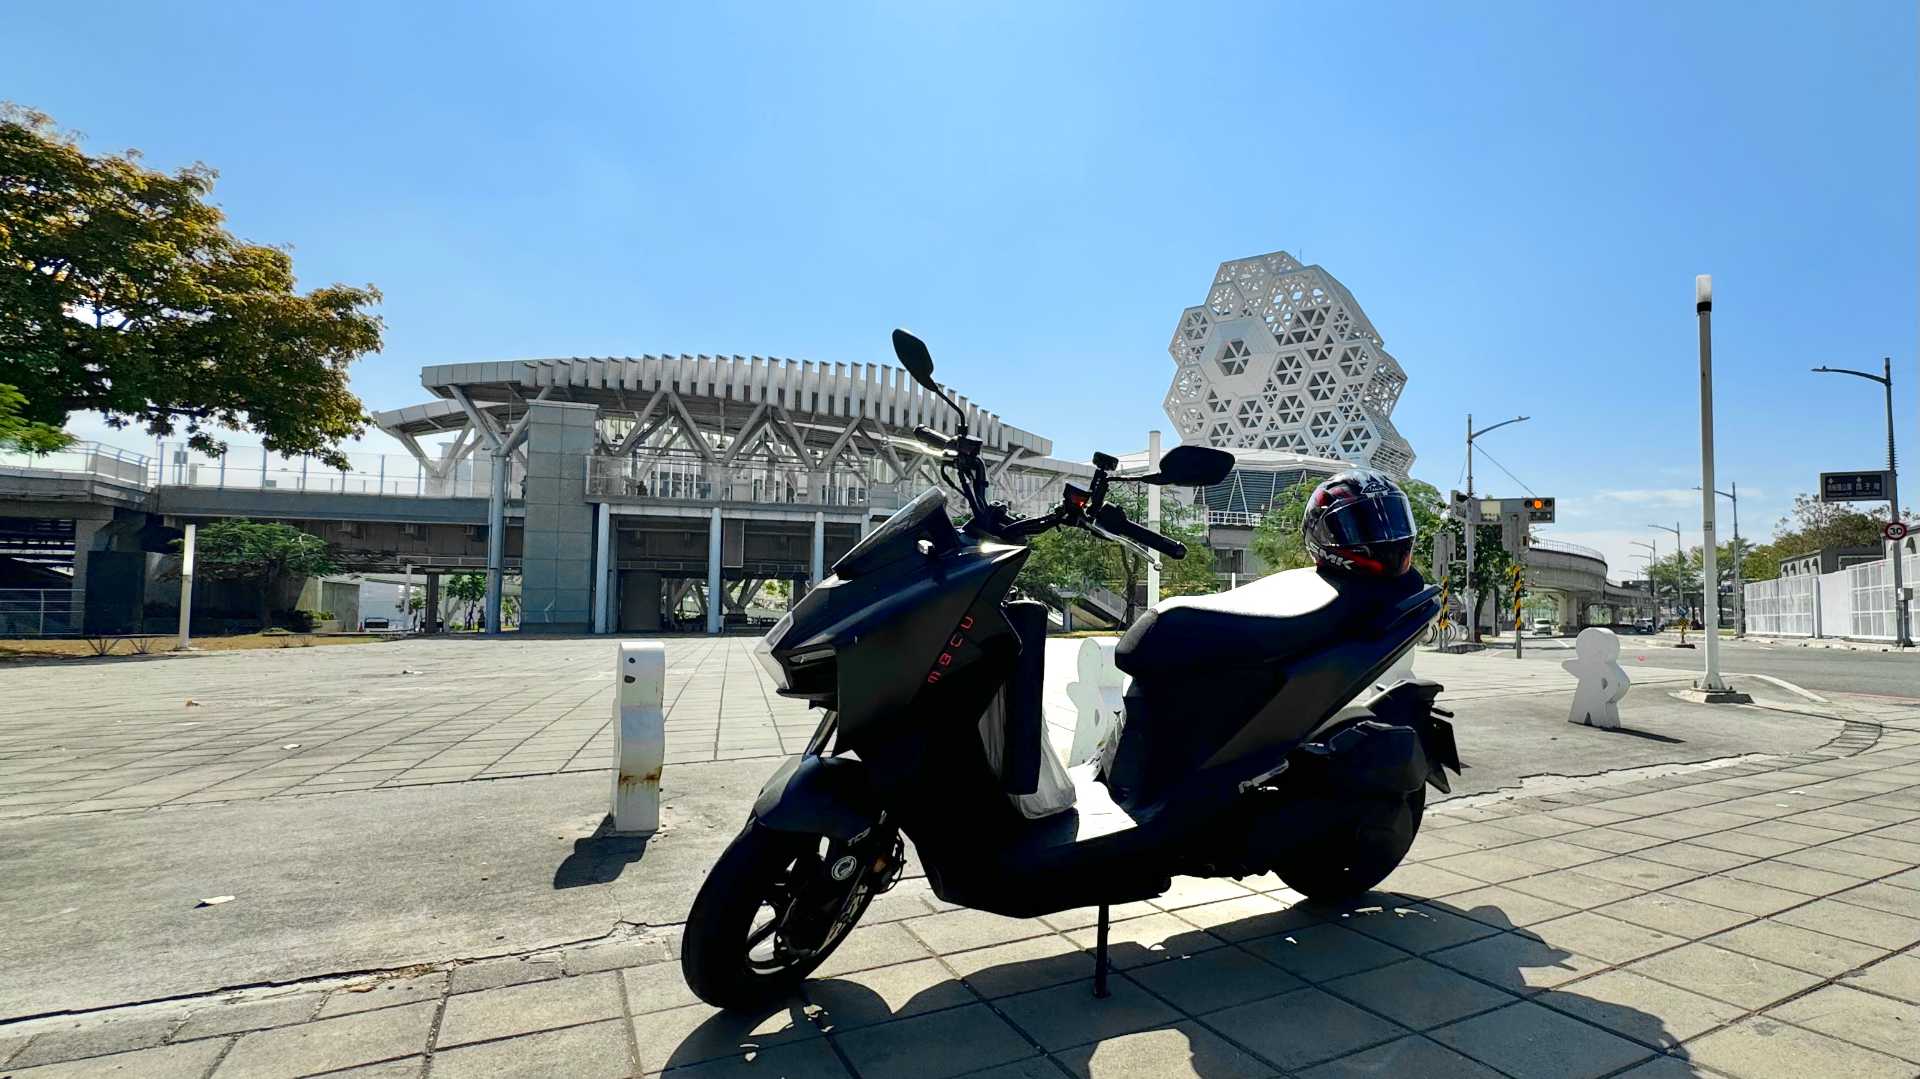 An SYM MMBCY scooter parked outside Kaohsiung Music Center. A motorcycle helmet rests on the scooter seat. It’s a beautiful sunny day.